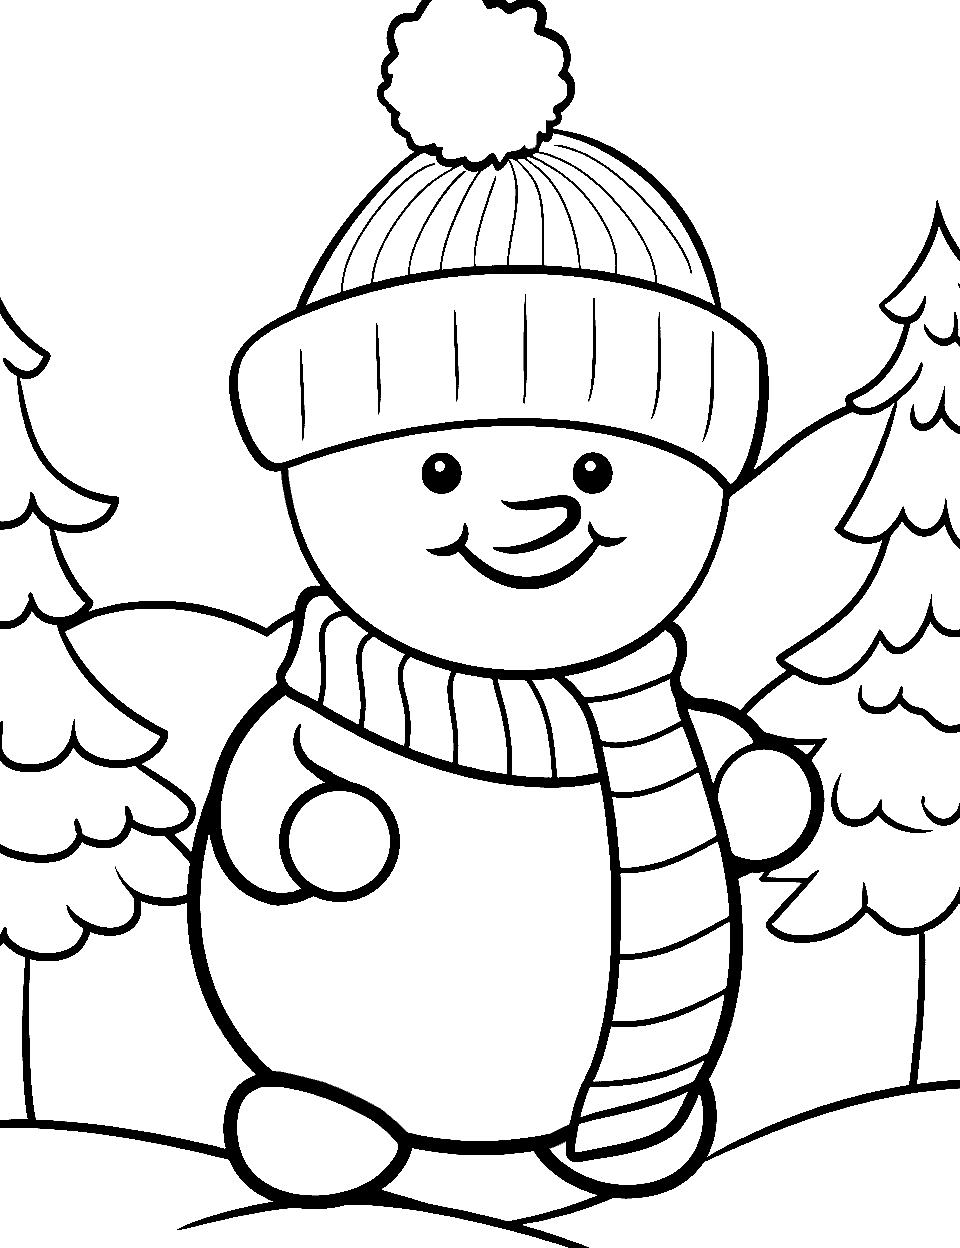 Winter Wonderland Coloring Page - Snow-covered trees with a snowman wearing a scarf and hat.